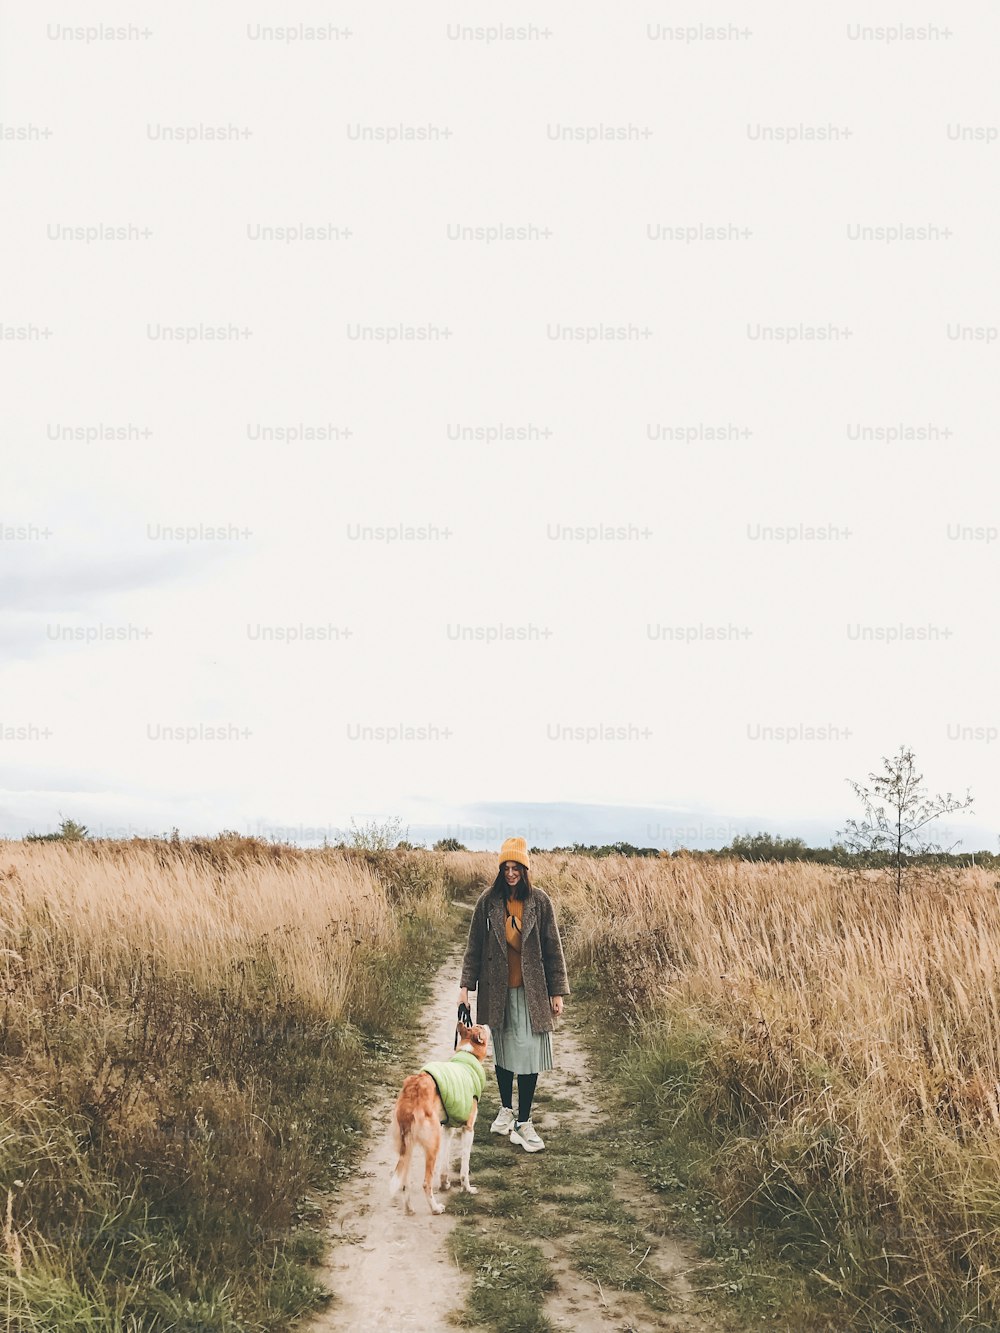 Stylish Hipster girl in yellow hat and coat walking with her golden dog in coat in autumn field among herbs. Woman in modern clothes walking with friend dog in countryside